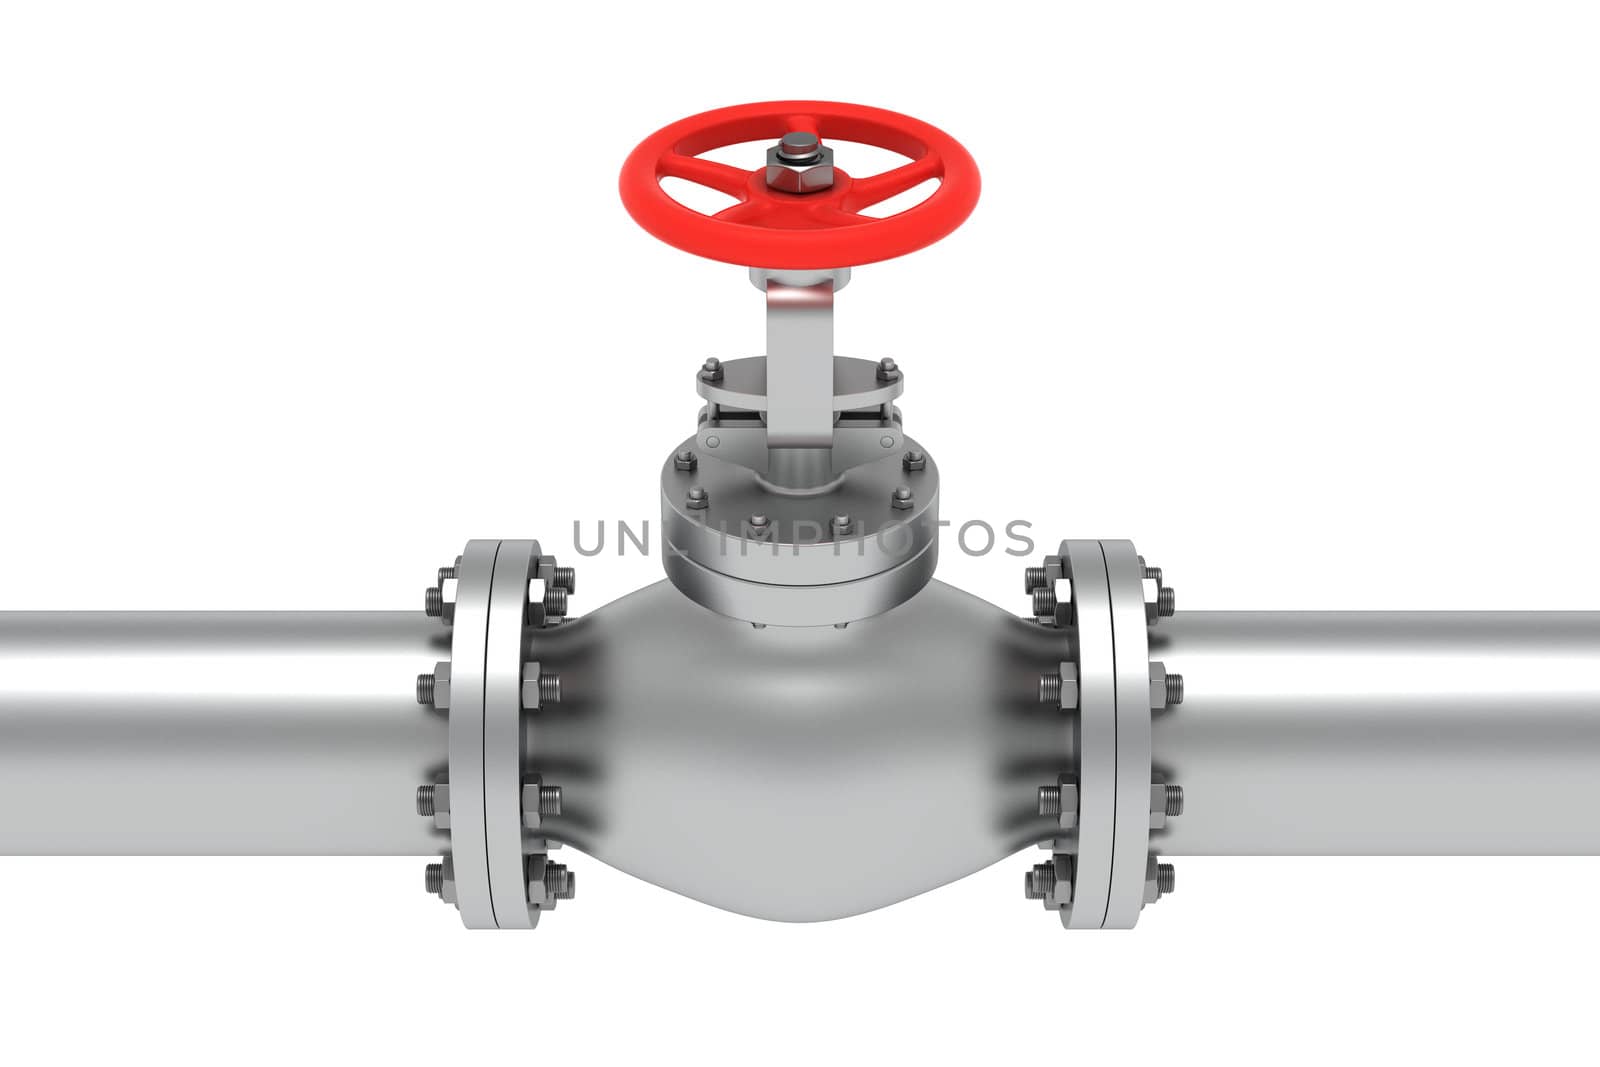 Red valve isolated on the white background